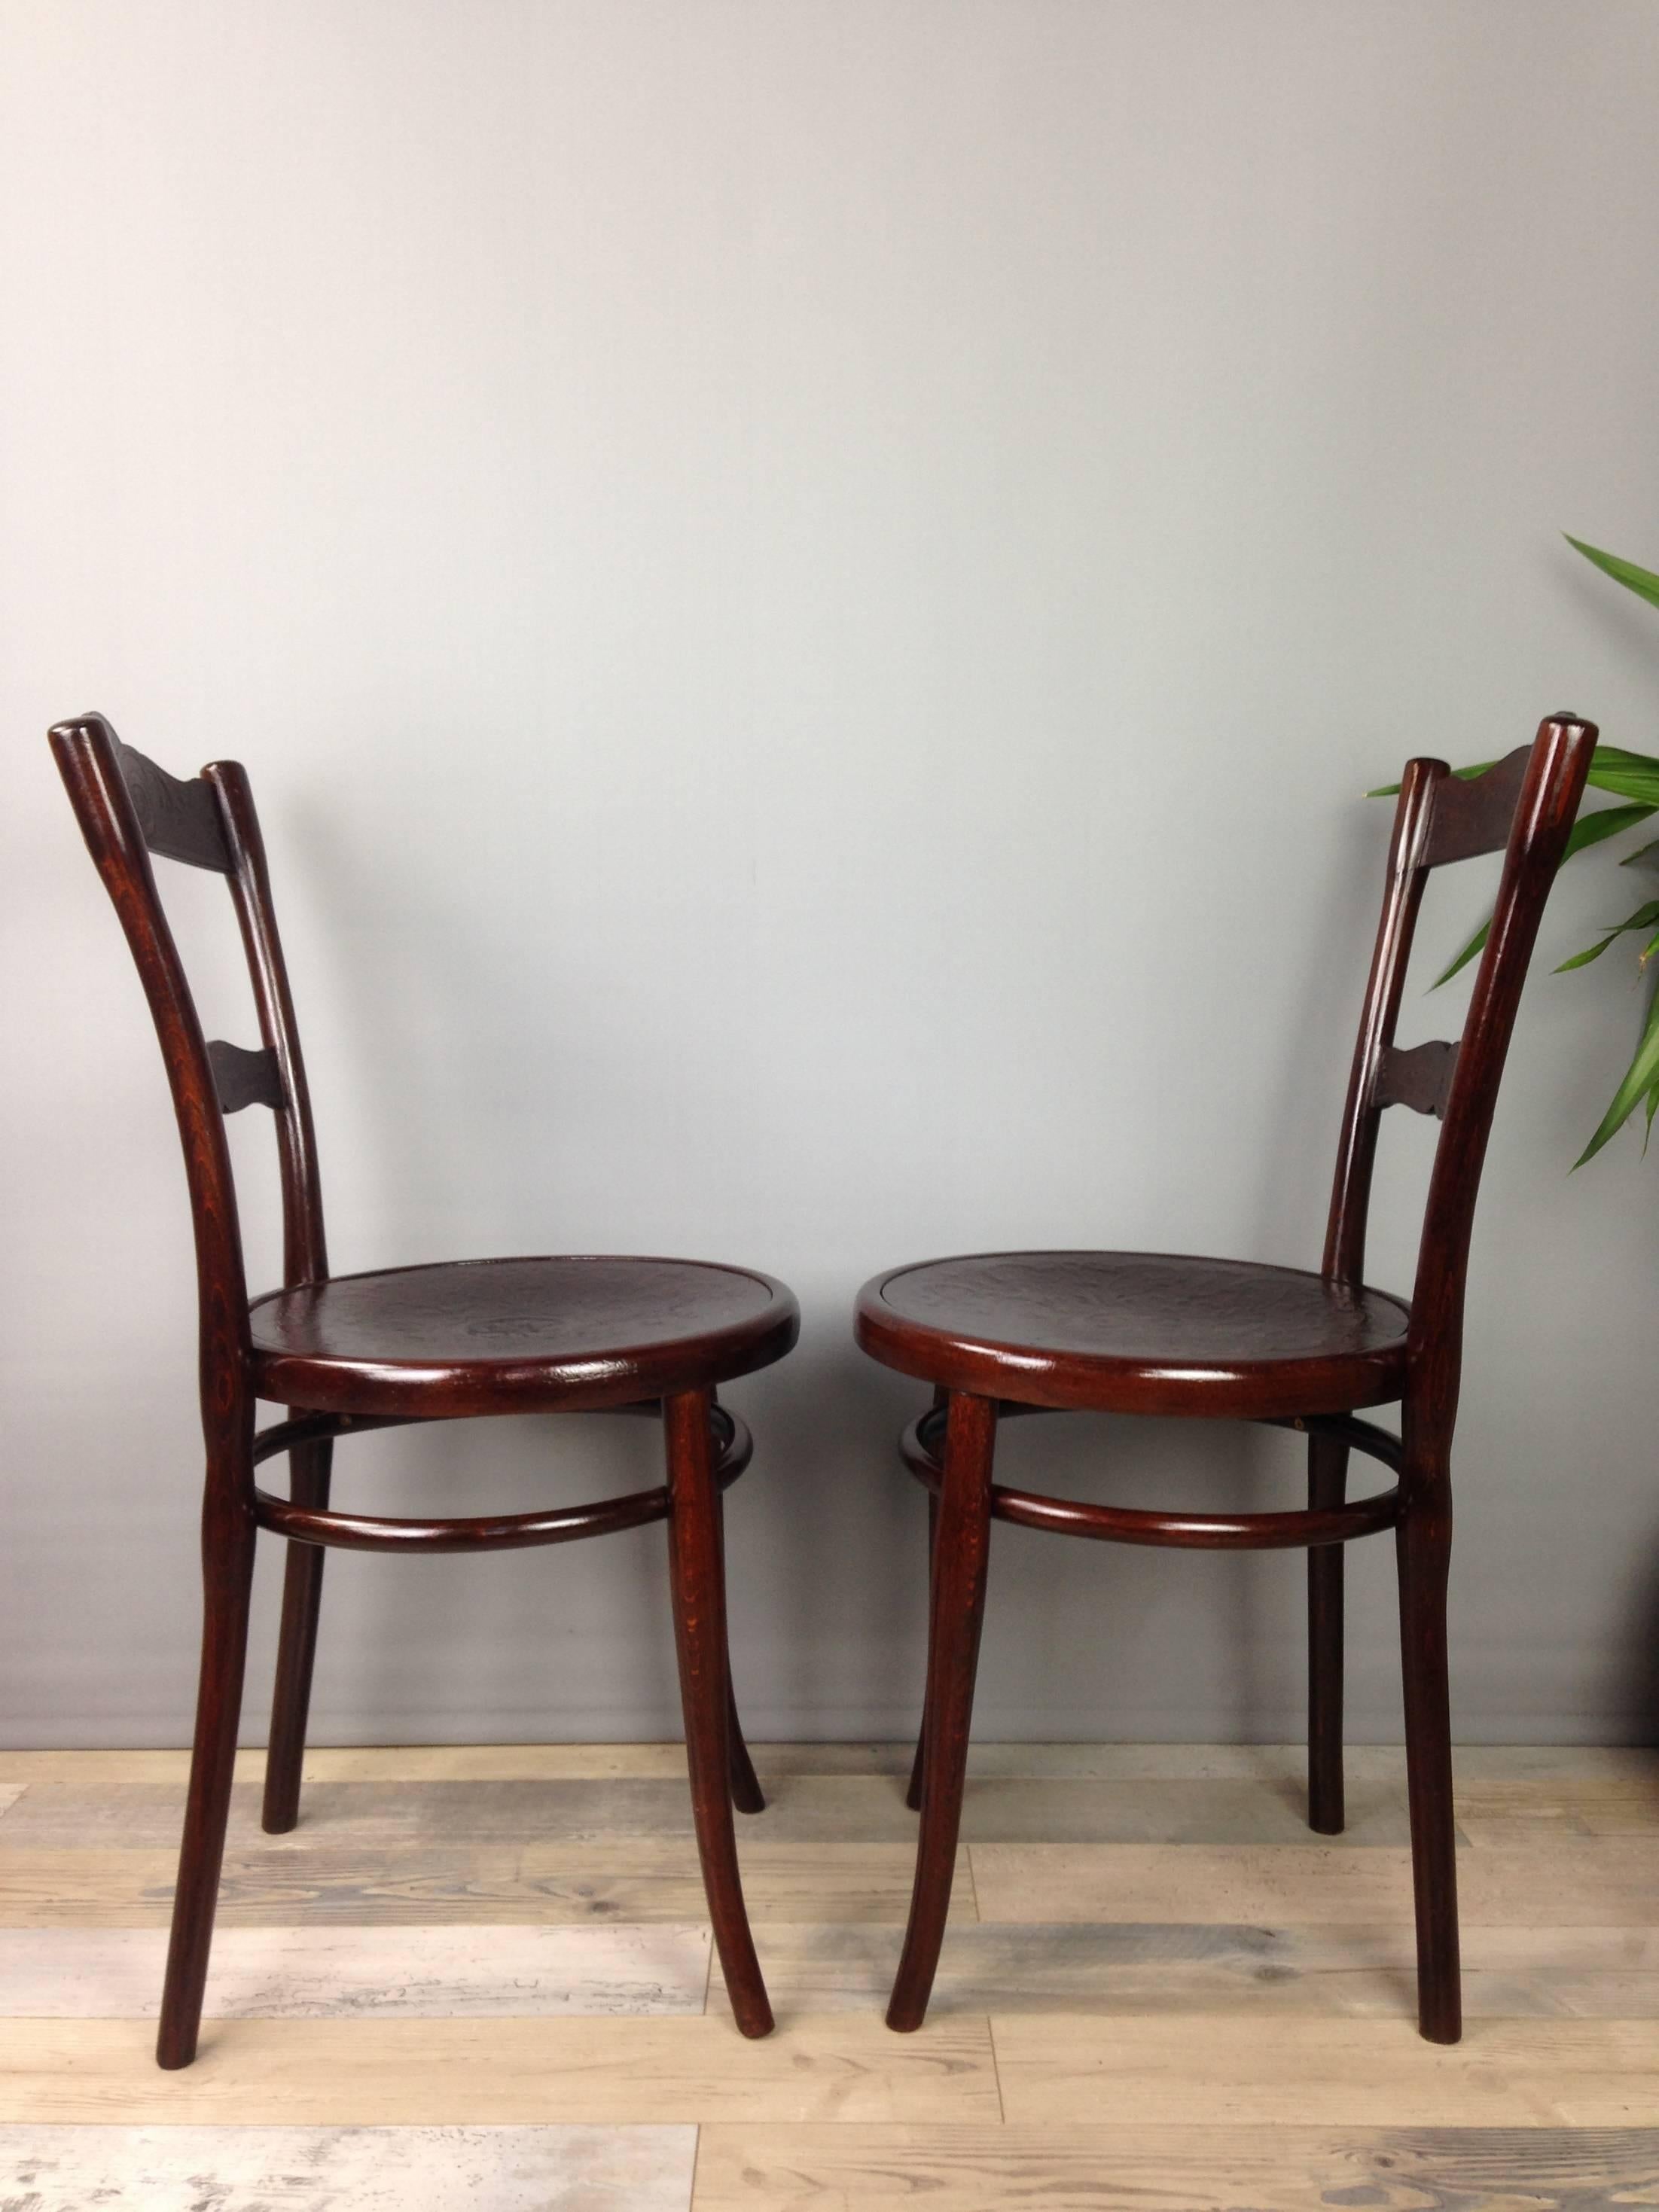 Pair of Thonet chairs No. 100, late 19th-early 20th century curved wood structure. 

The Famous House, of international fame, was founded in 1819 by Mickael Thonet. In 1859 he industrialized for the first time the manufacture of furniture by